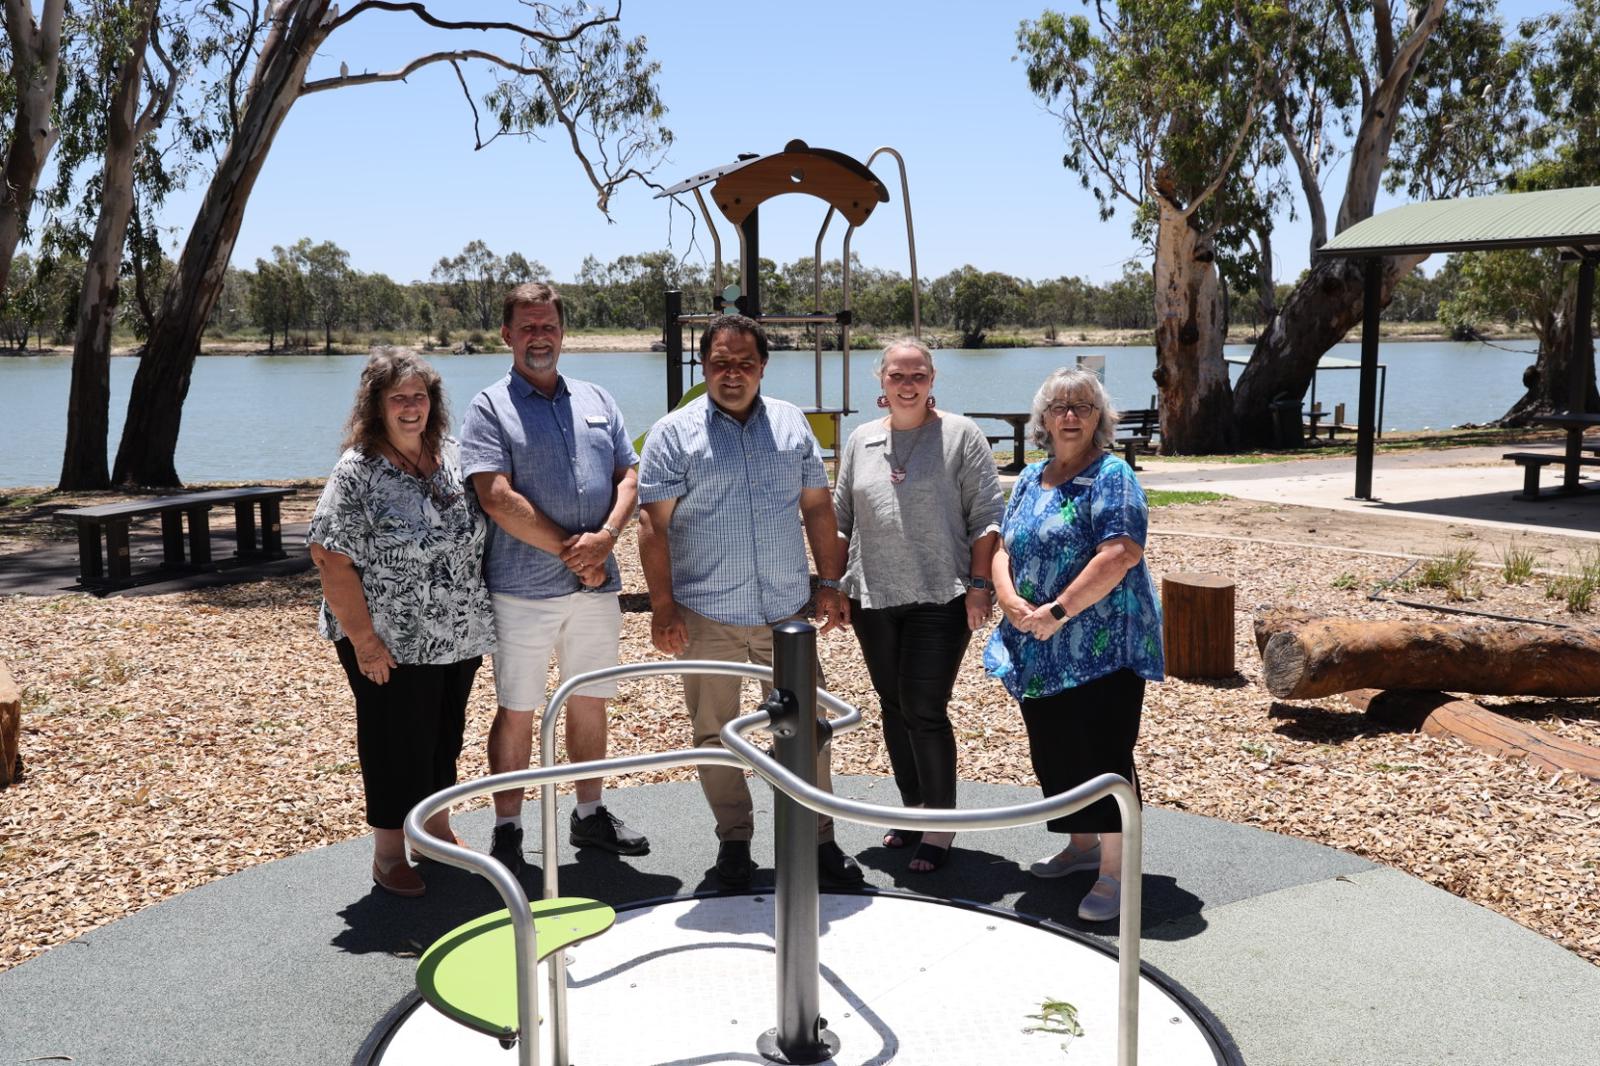 MID-MURRAY COMMUNITY PROJECTS COMPLETED